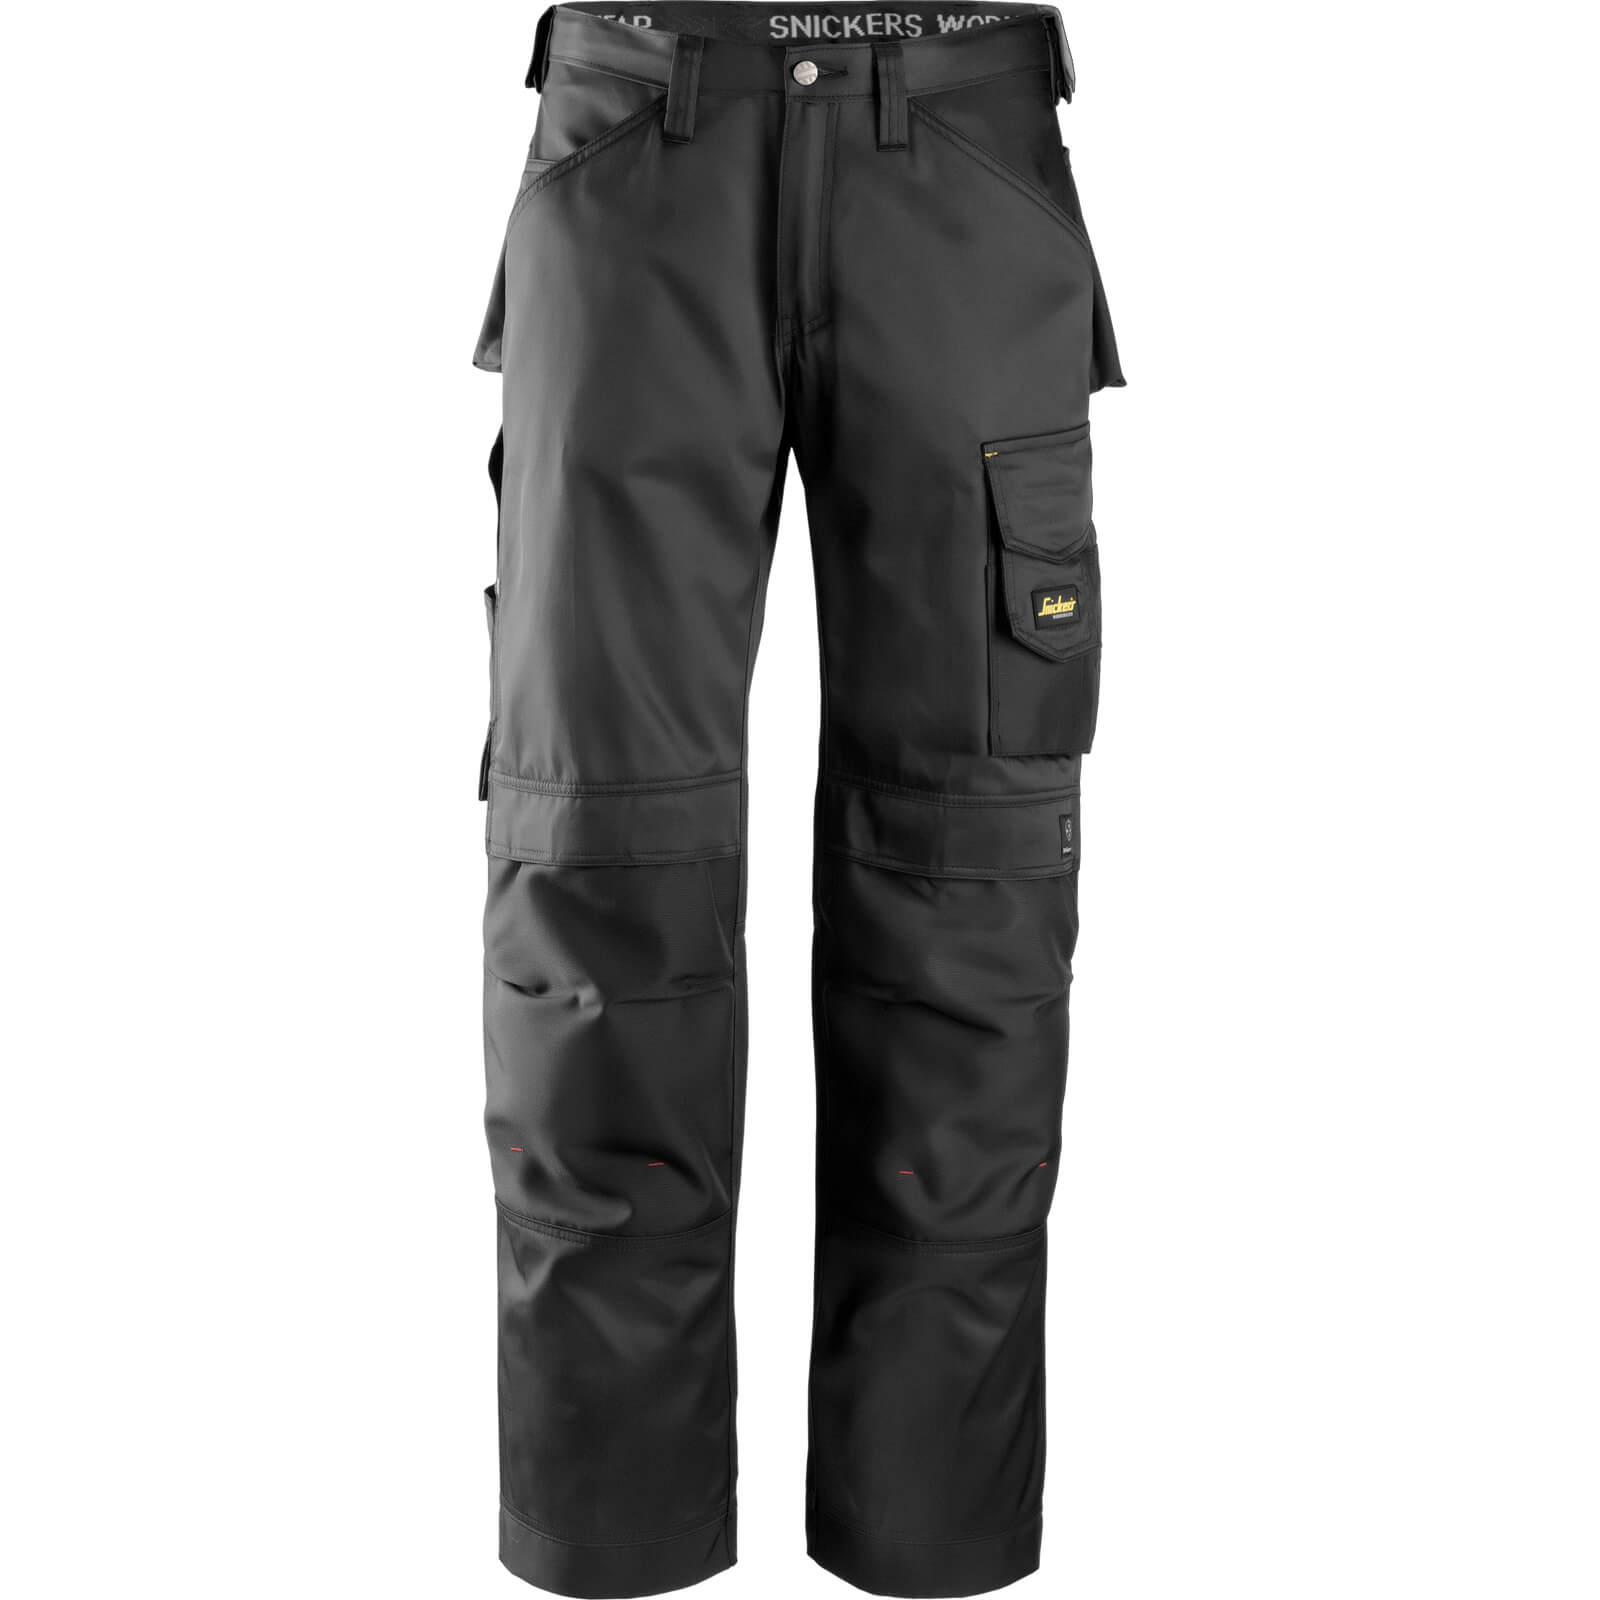 Image of Snickers 3312 Mens DuraTwill Work Trousers Black 31" 35"